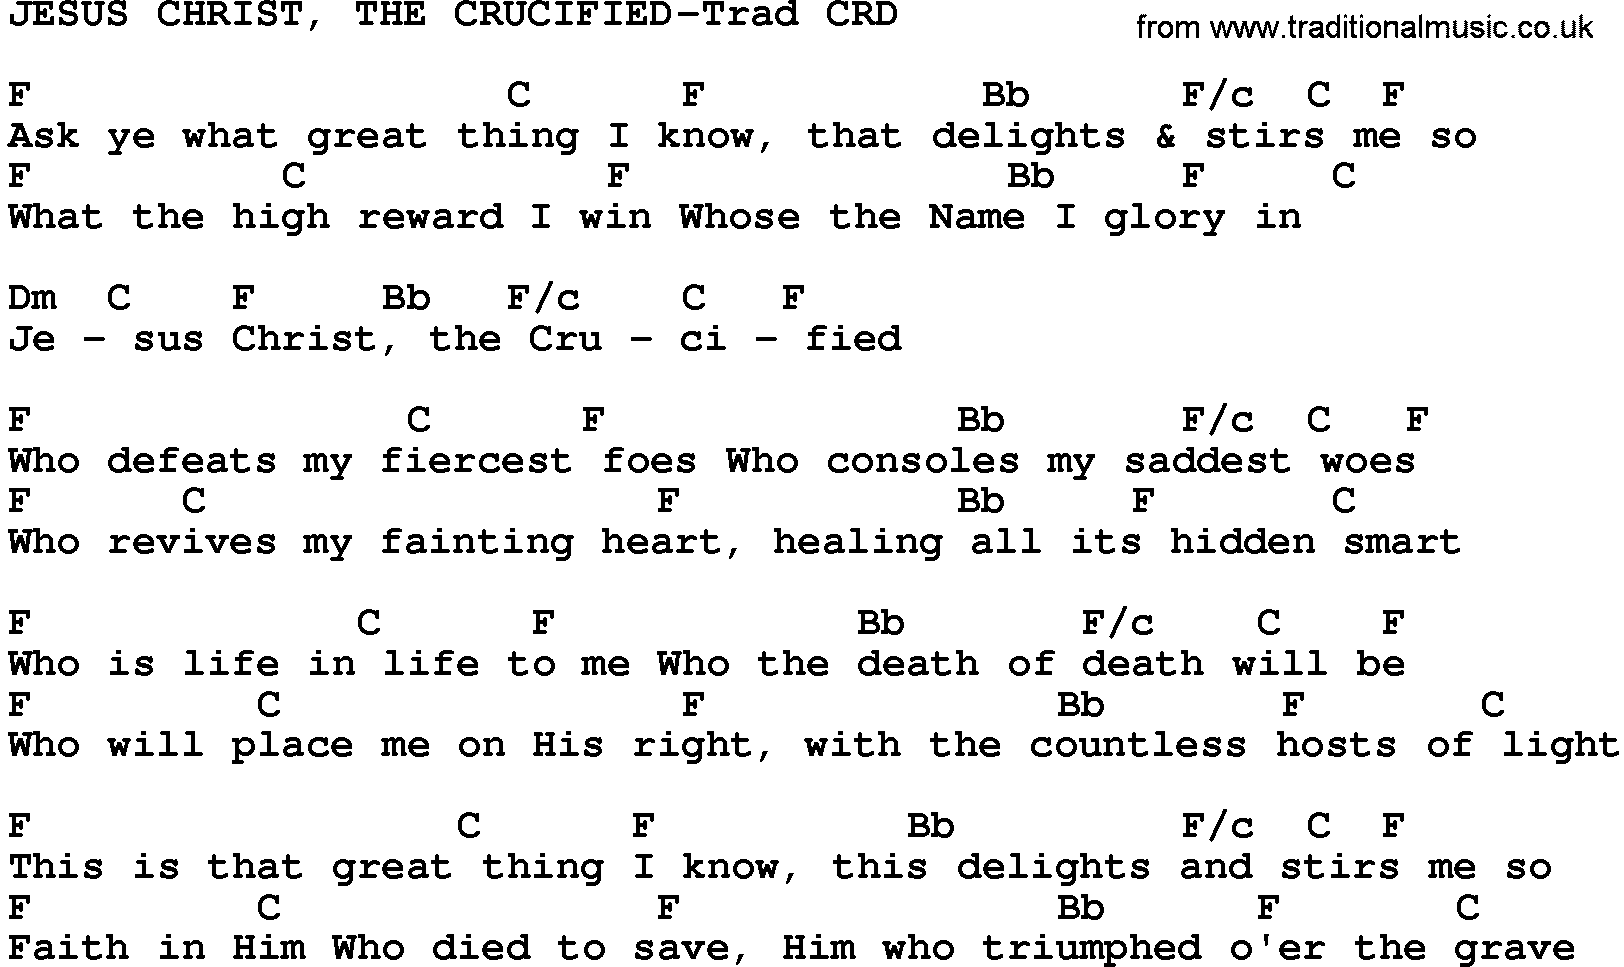 Gospel Song: Jesus Christ, The Crucified-Trad, lyrics and chords.